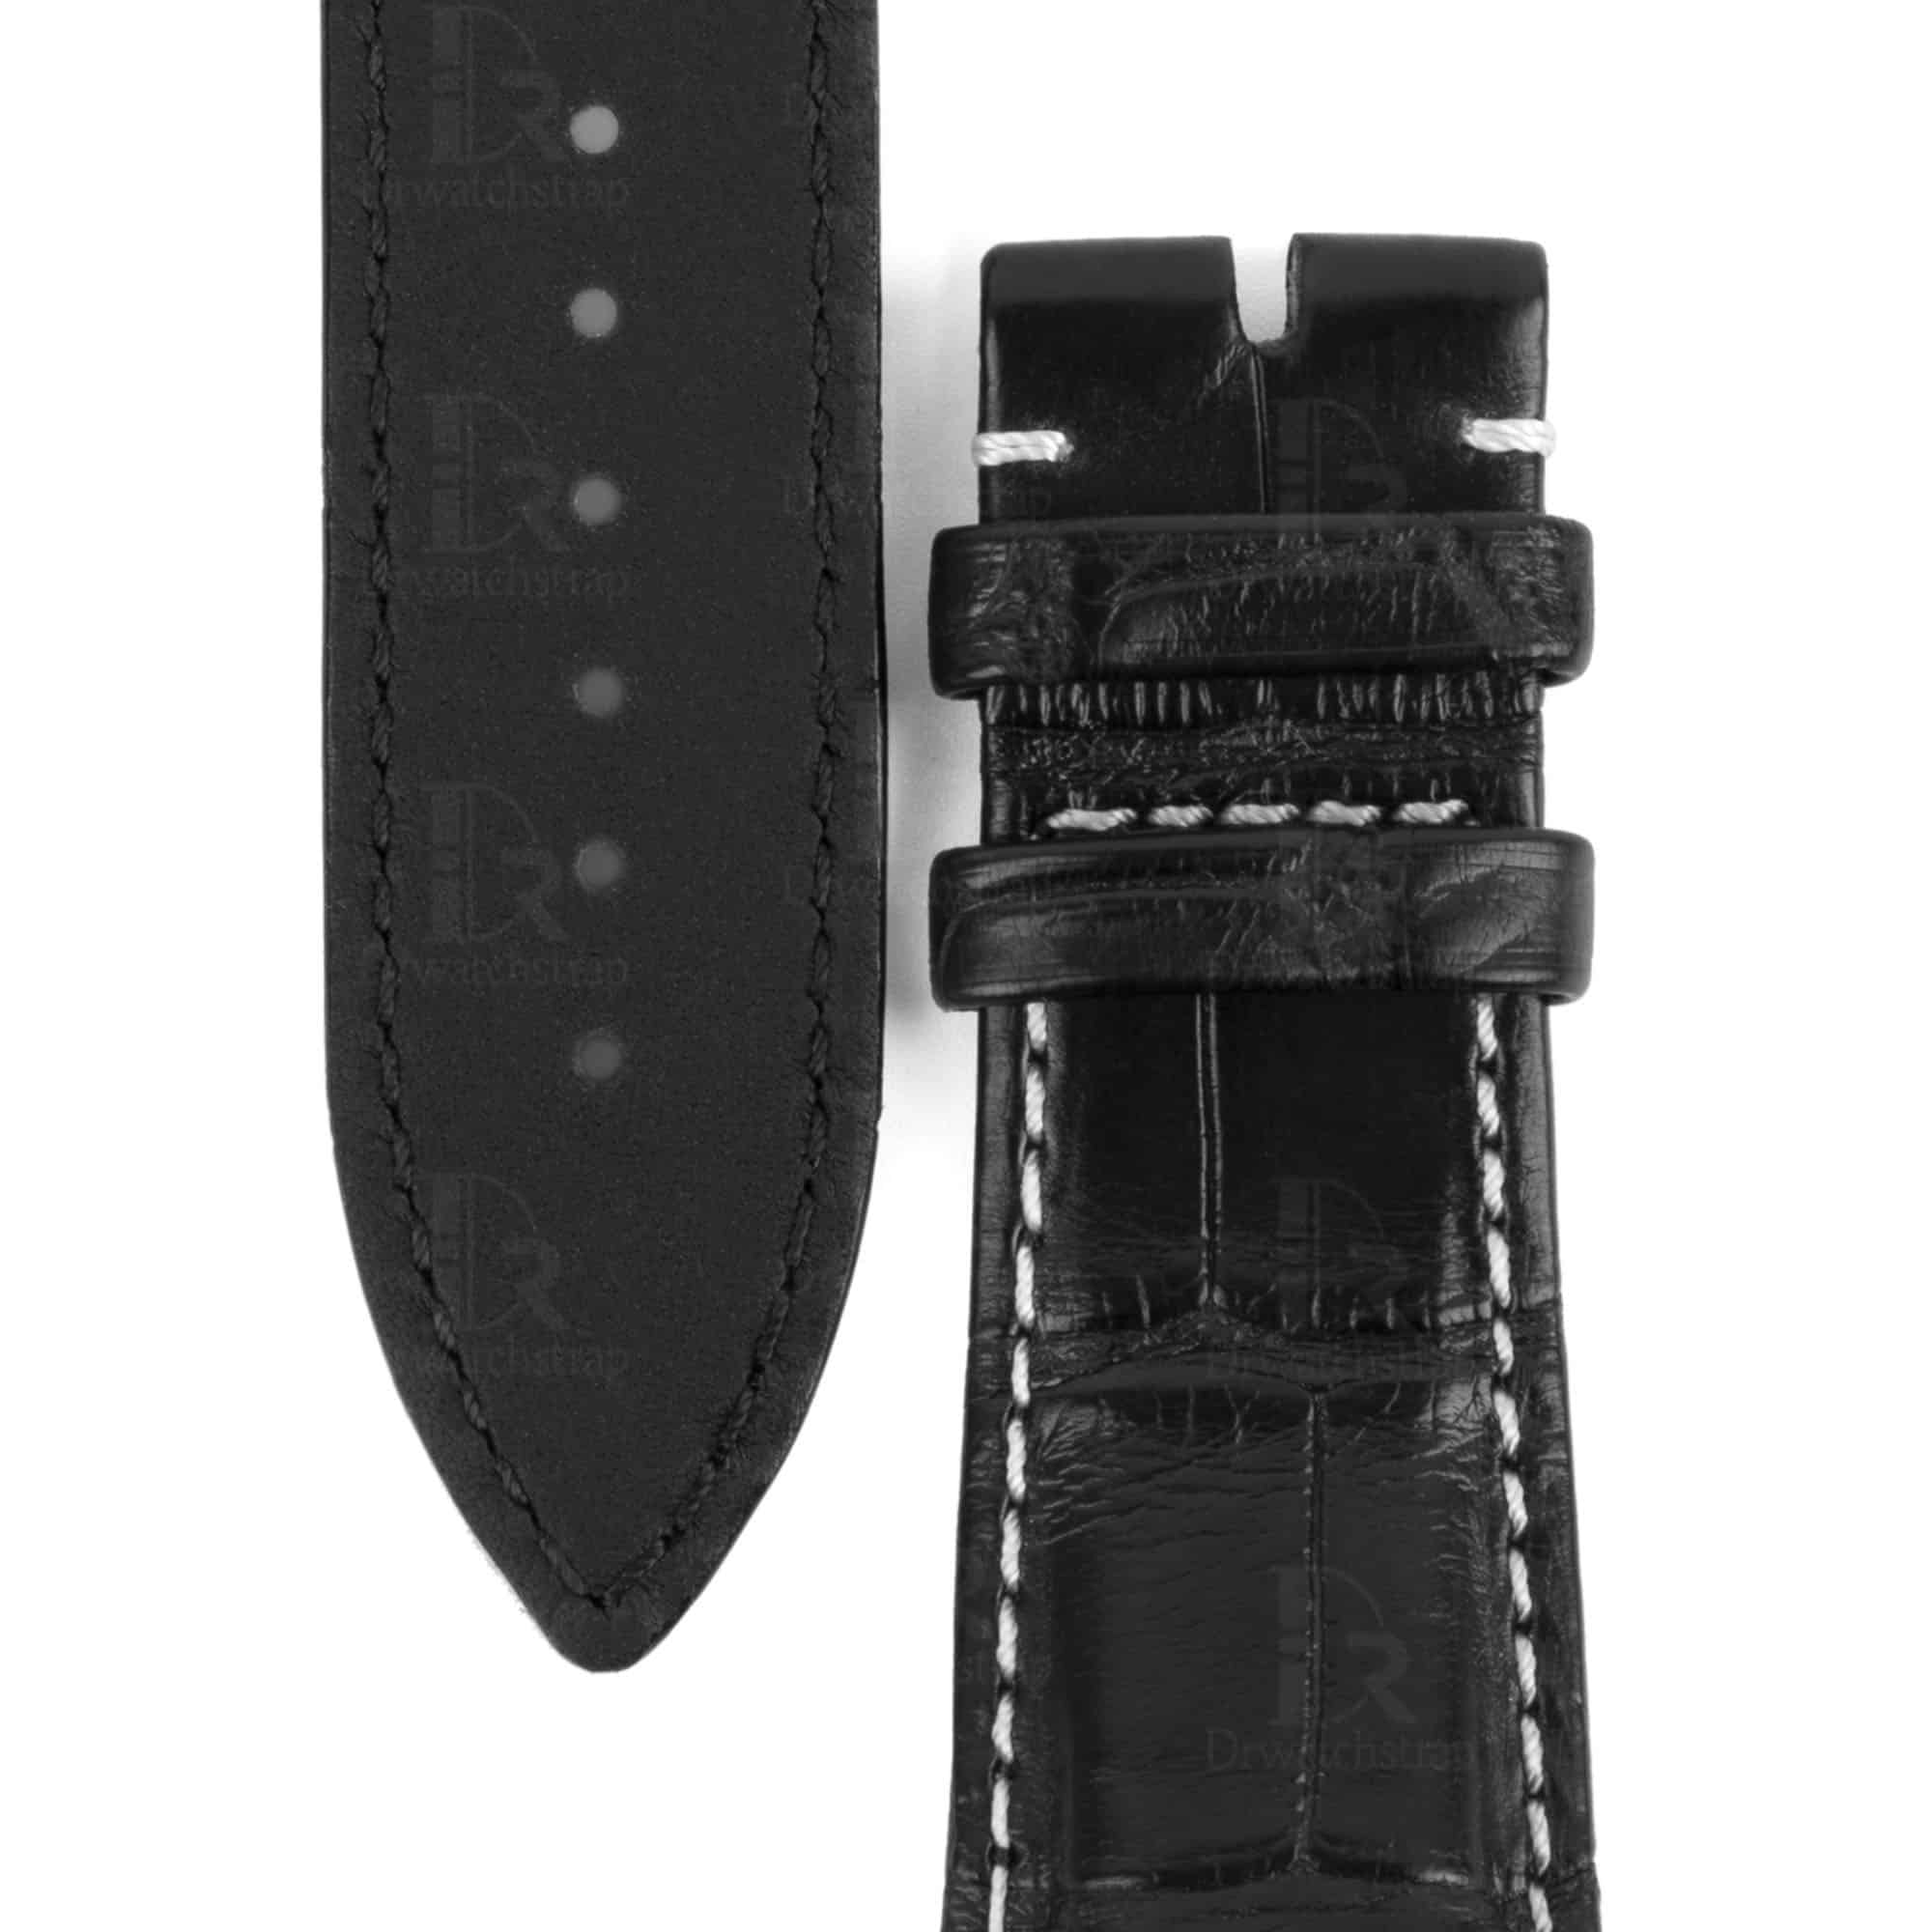 Custom handmade Grade A alligator black leather Franck Muller Conquistador strap and watch band replacement for Franck Muller Conquistador Grand Prix 8900 9900 SC DT GPG luxury watches - Best quality crocodile watch bands online at a low price